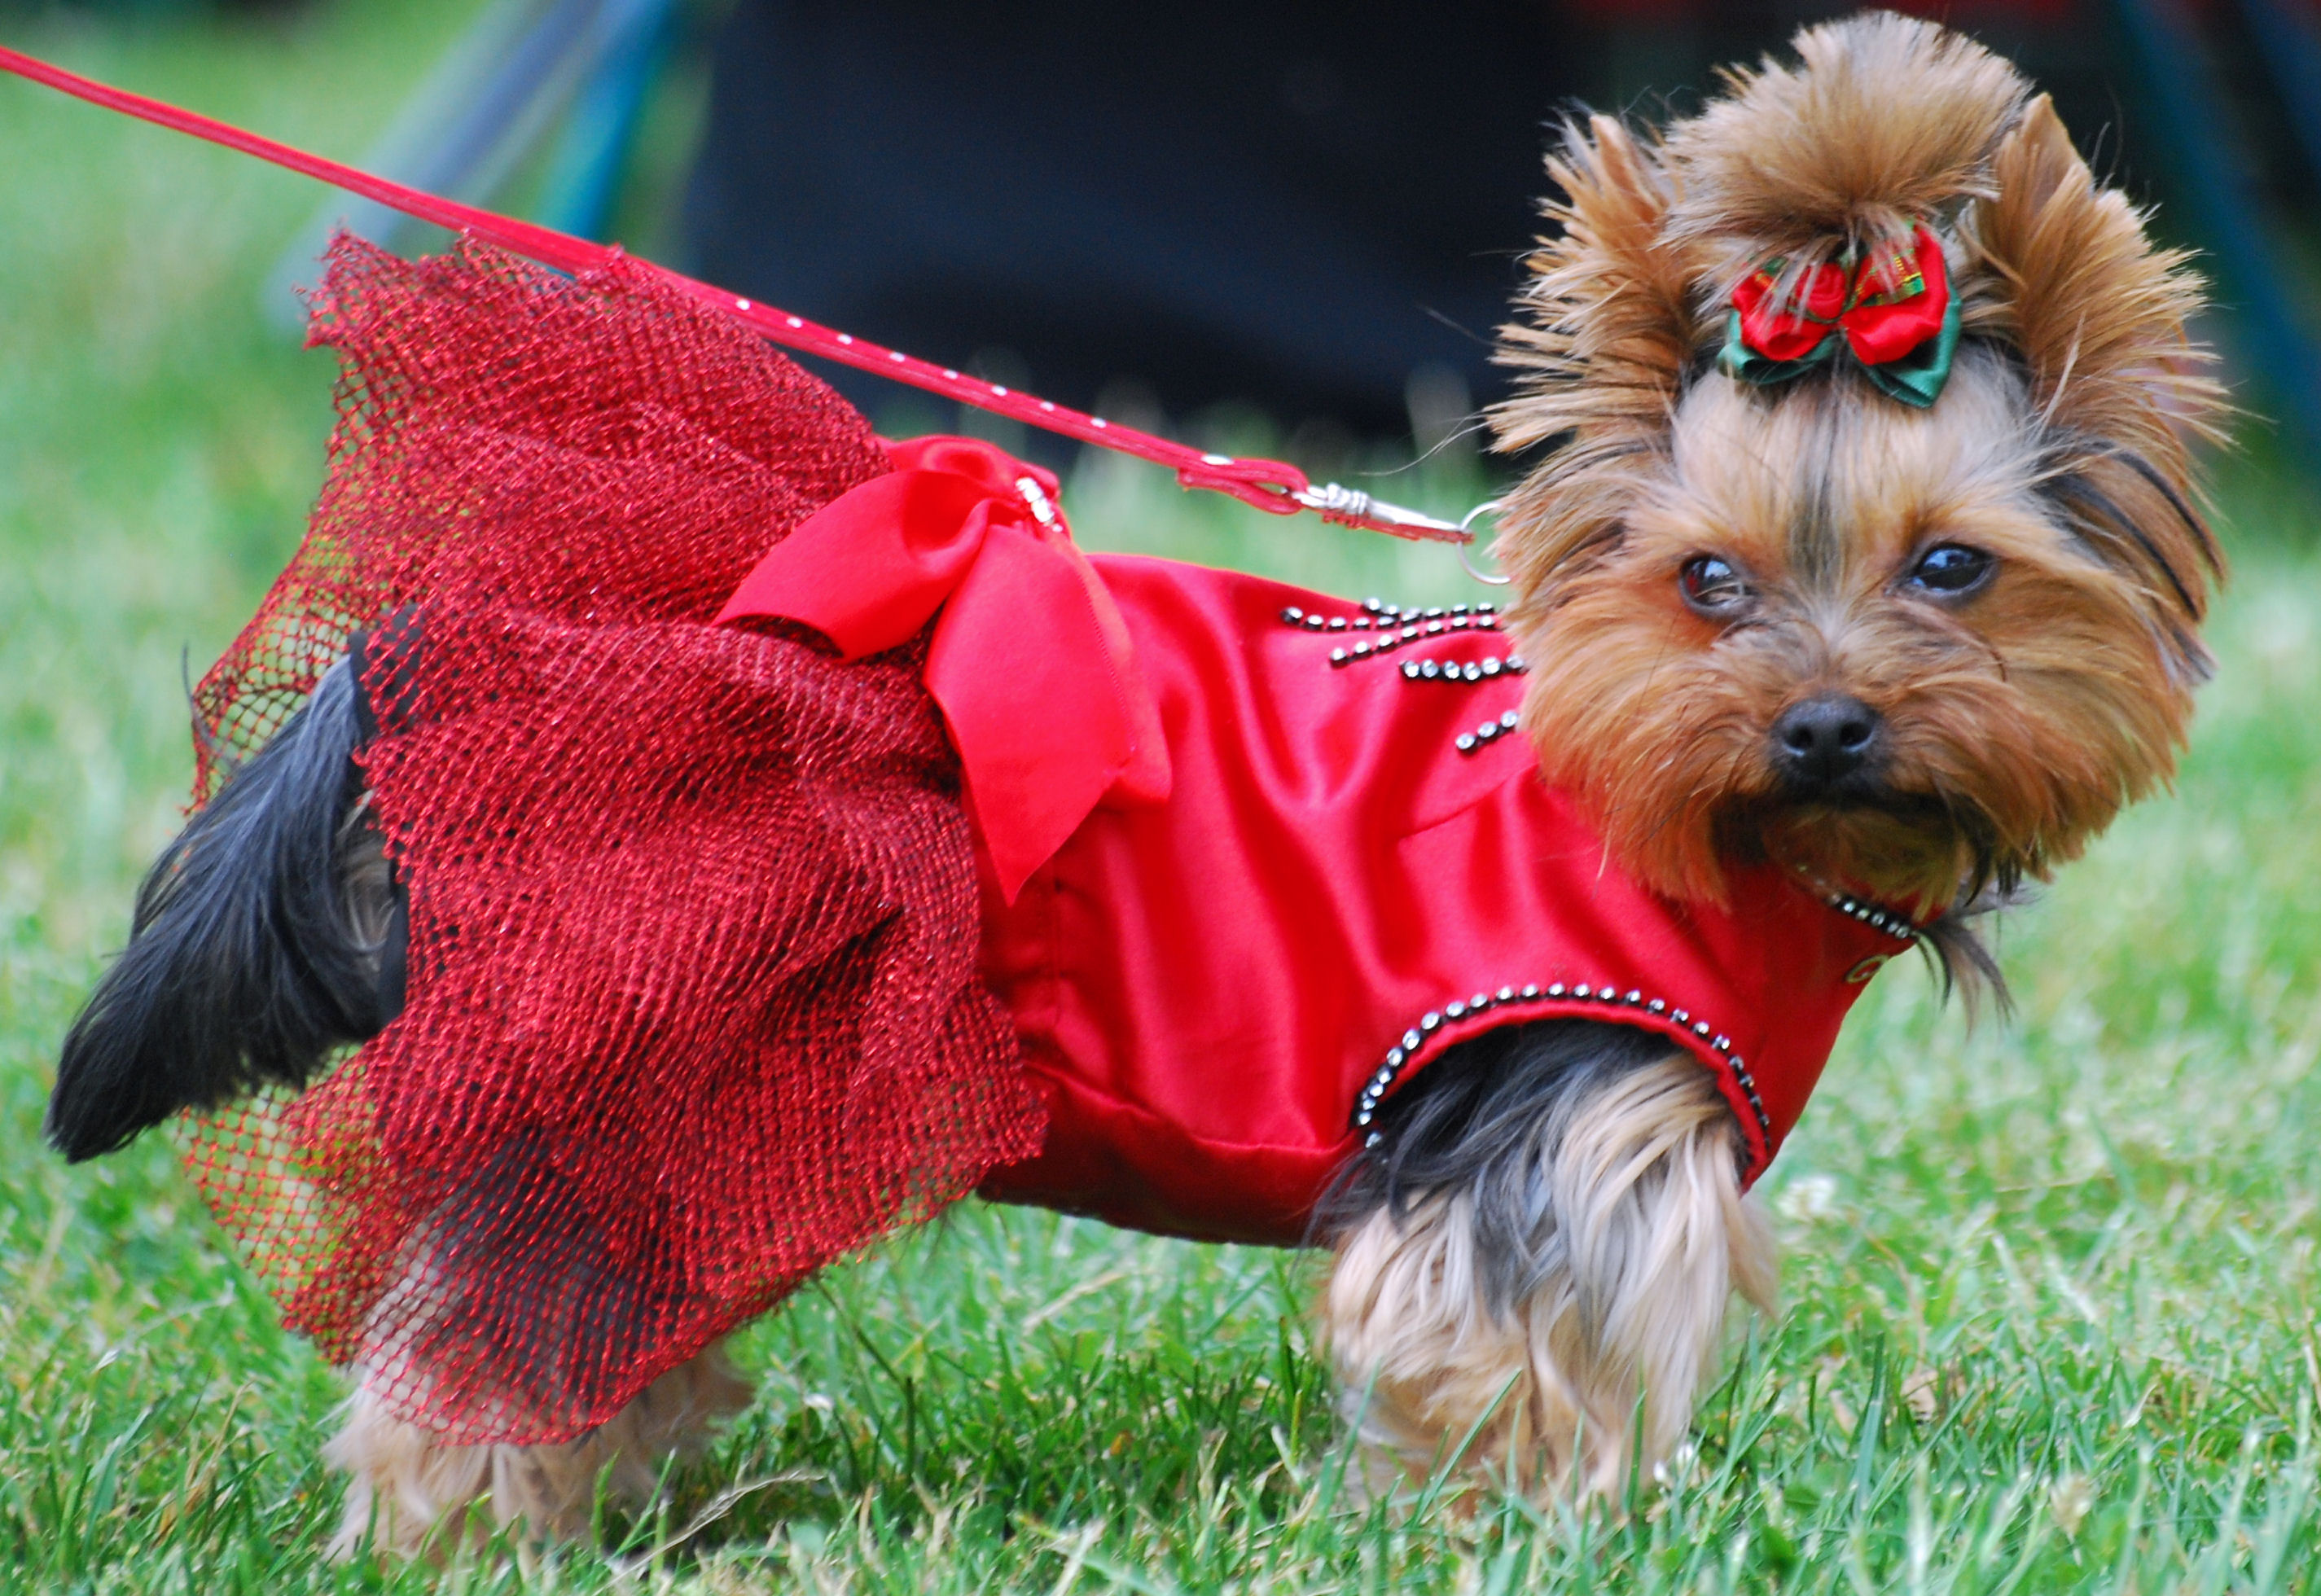 Cute Yorkshire Terrier Dog In Red Dress